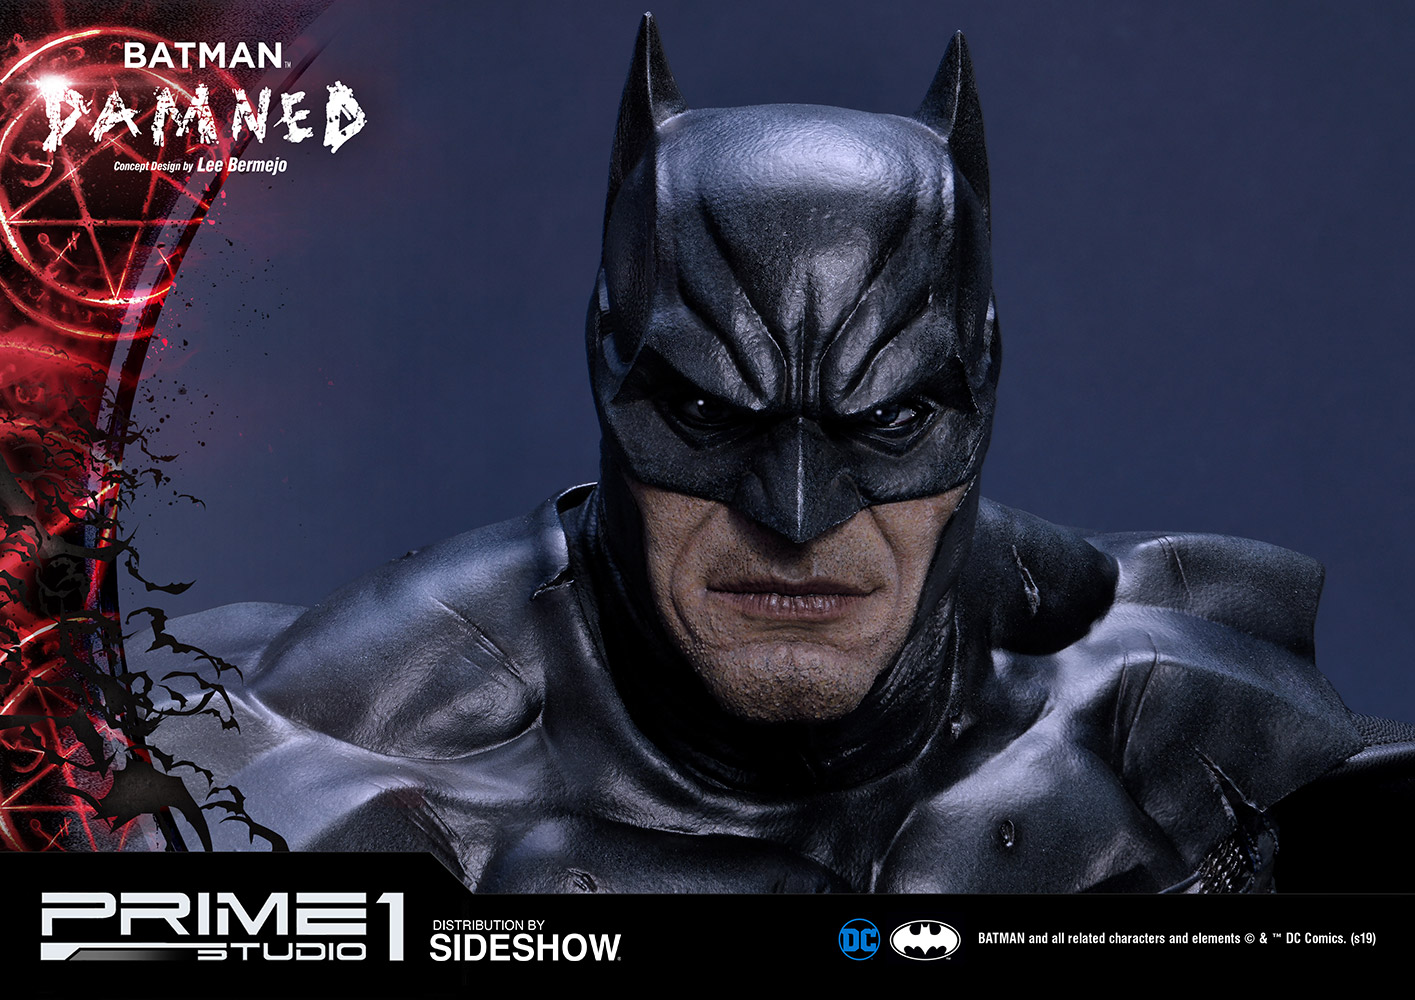 Sideshow Collectibles Releases 'Batman: Damned' and 'Batman: Damned Deluxe'  Statues by Lee Bermejo - Dark Knight News